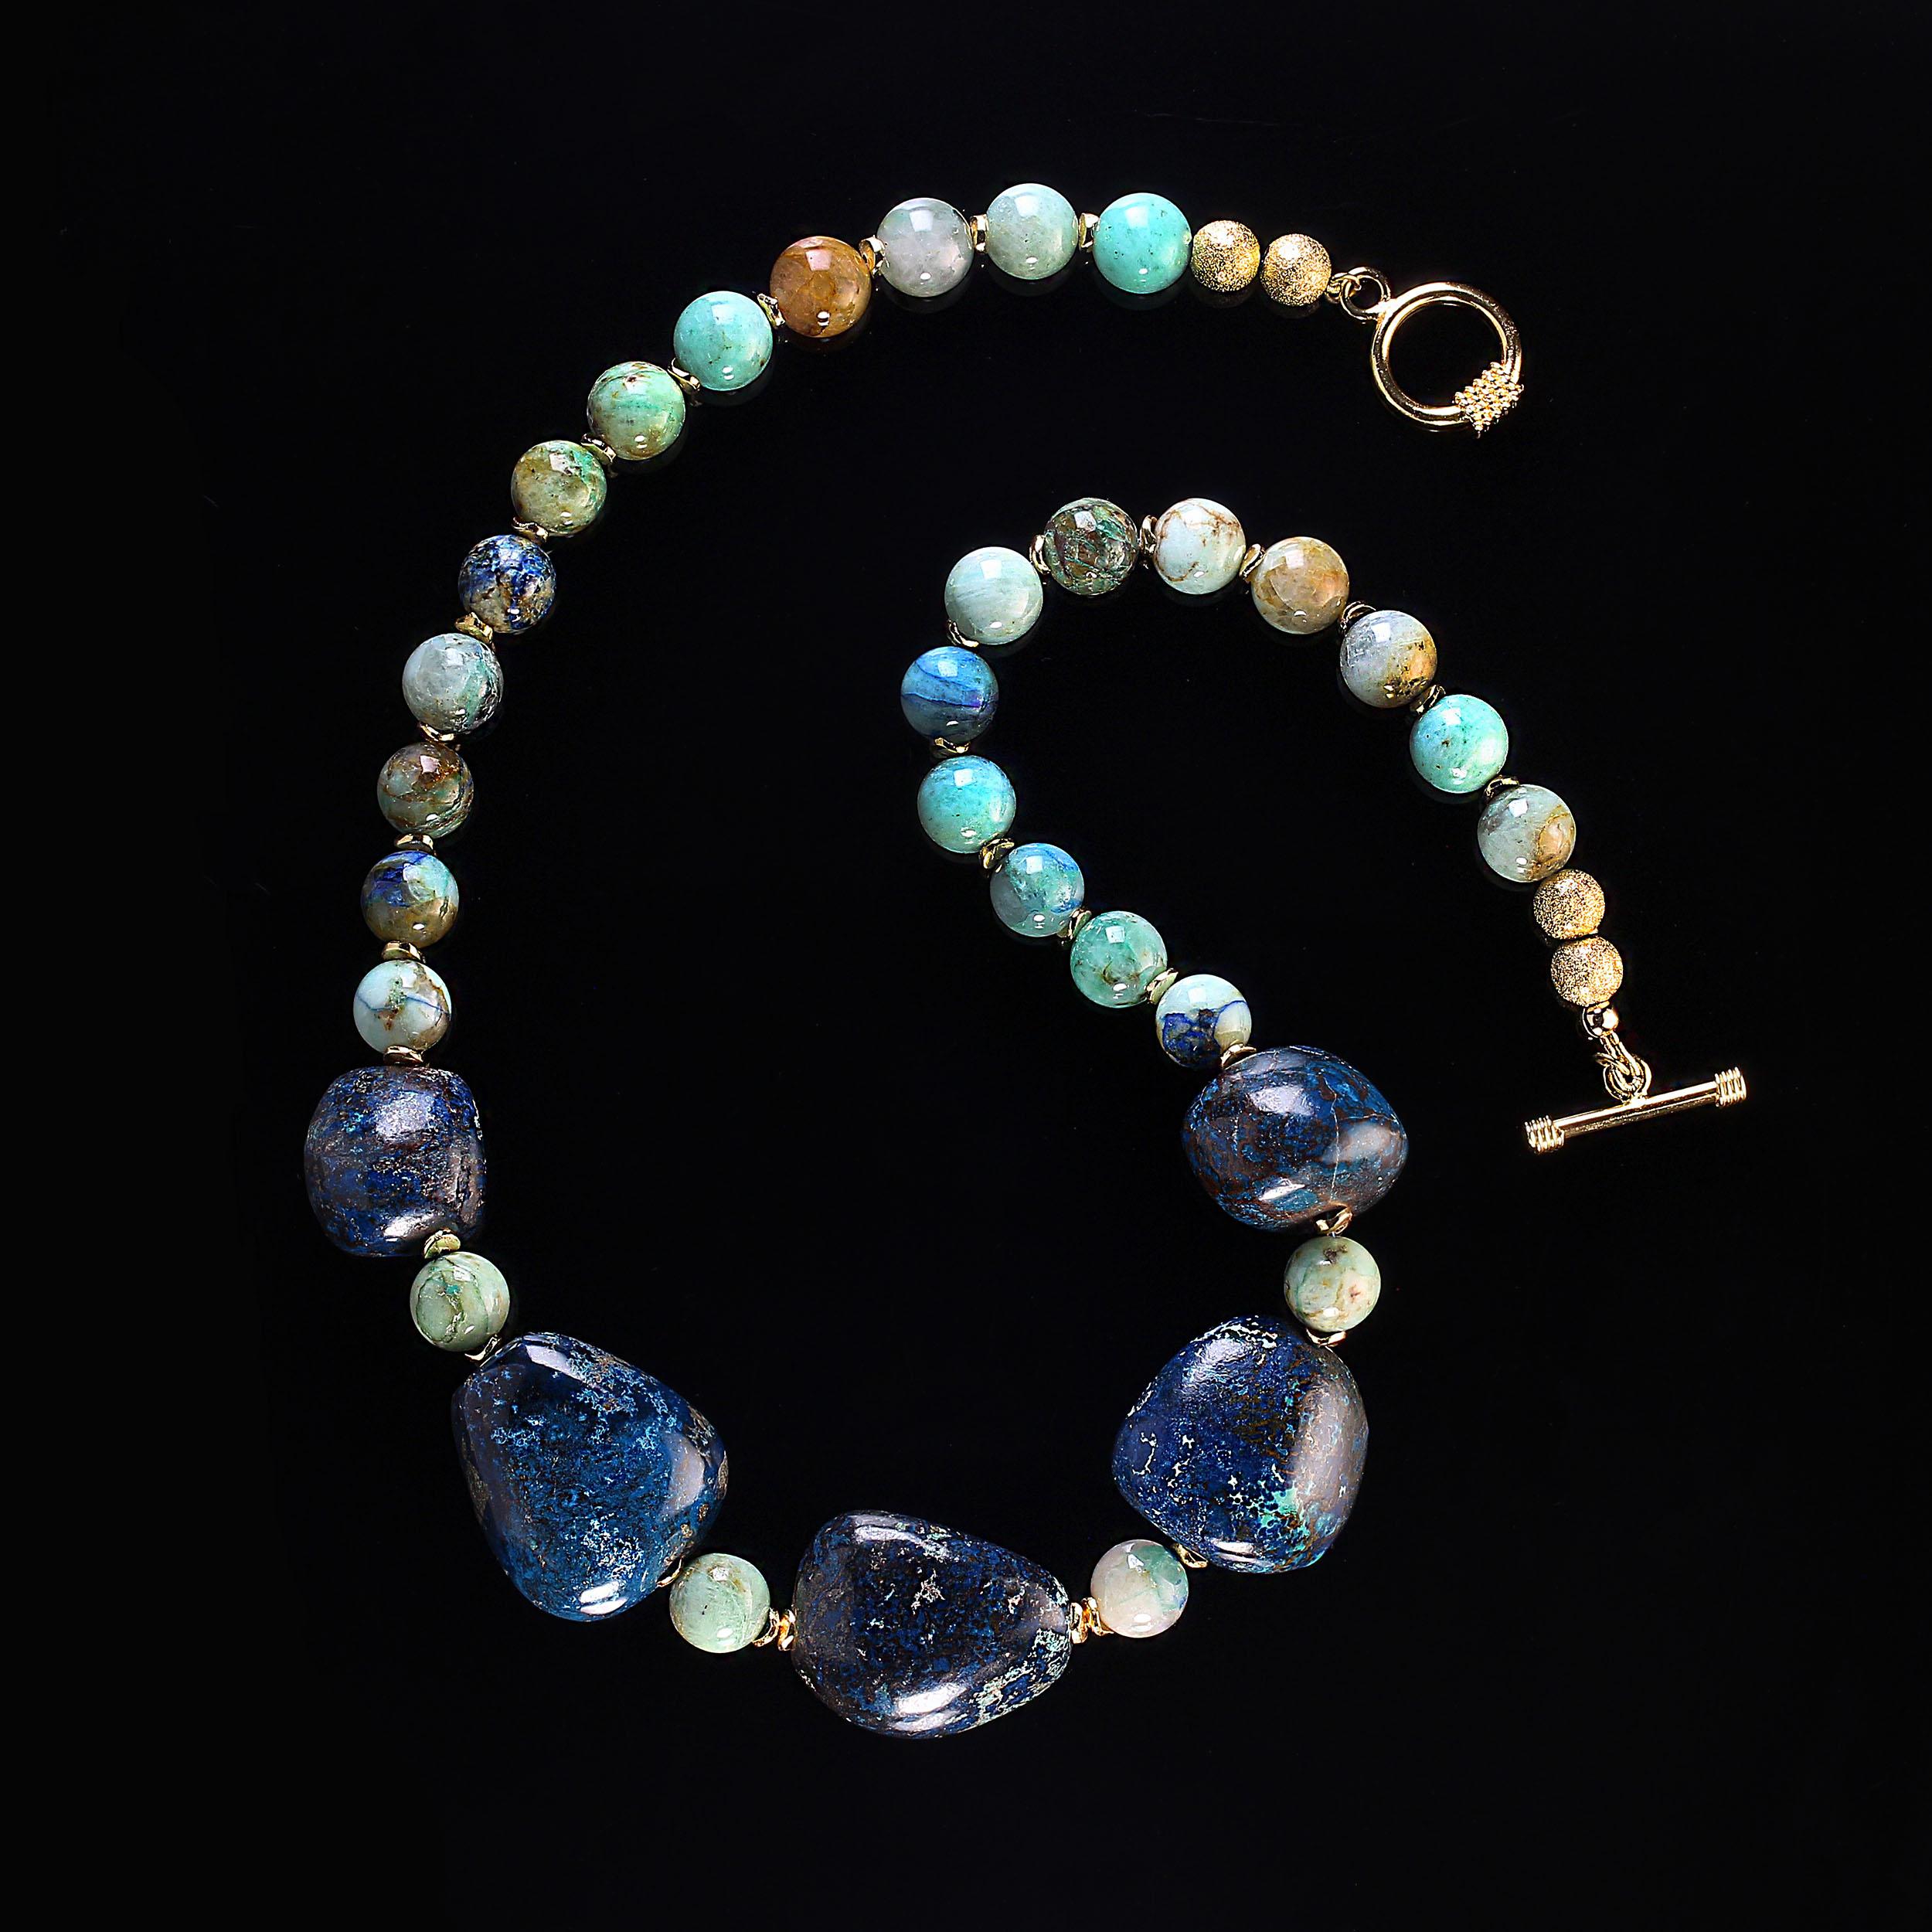 Artisan AJD 19.5 Inch Chrysocolla necklace with Gorgeous Focal & Goldy Accents 